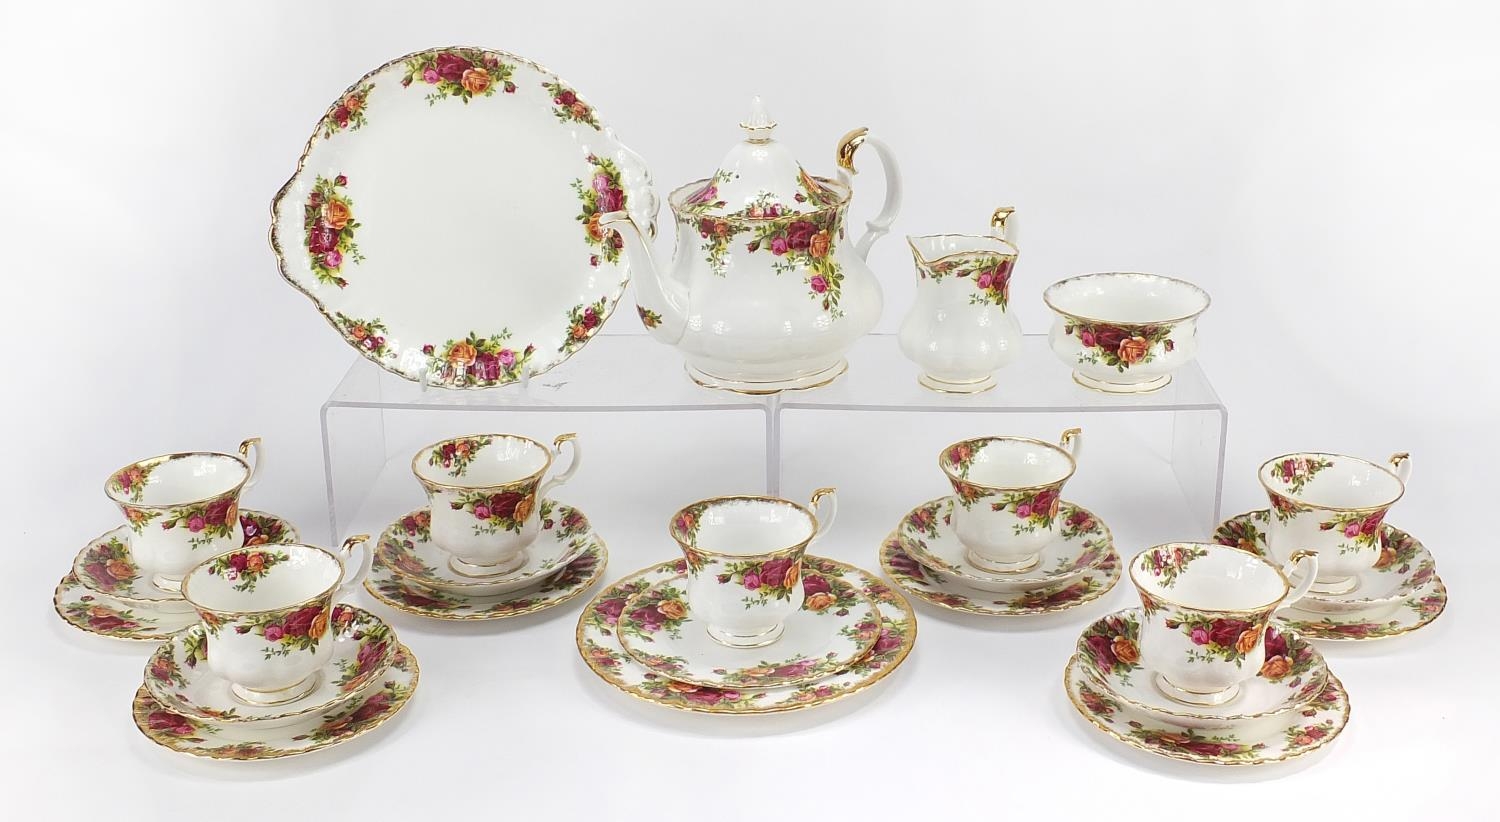 Royal Albert Old Country Roses teaware including teapot and trios, the teapot 24cm in length : For